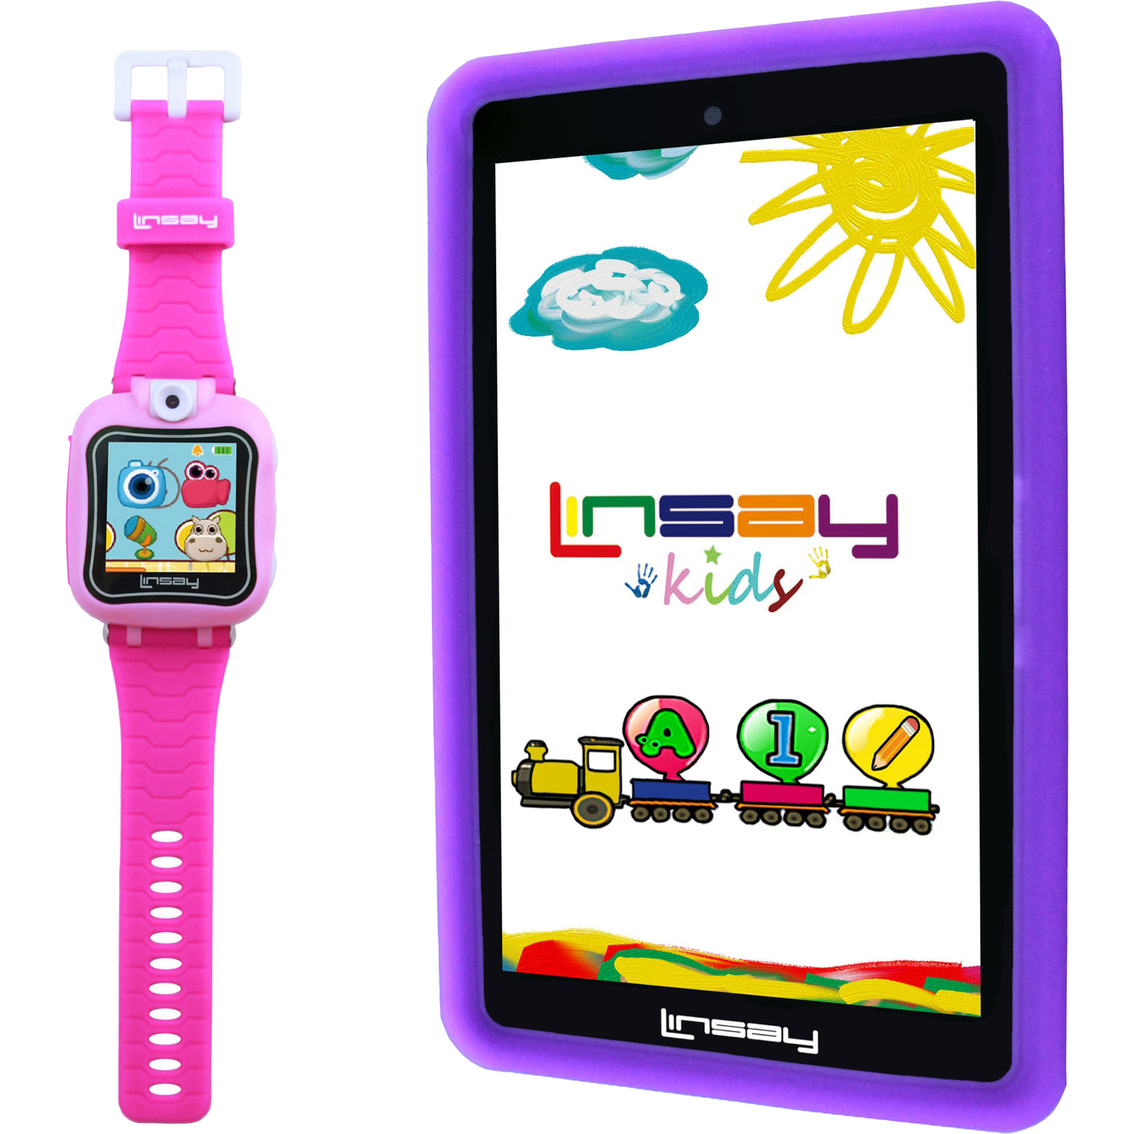 Linsay 7 in. 2GB RAM 32GB Tablet with Kids Holder, Pen and Smartwatch - Image 3 of 3